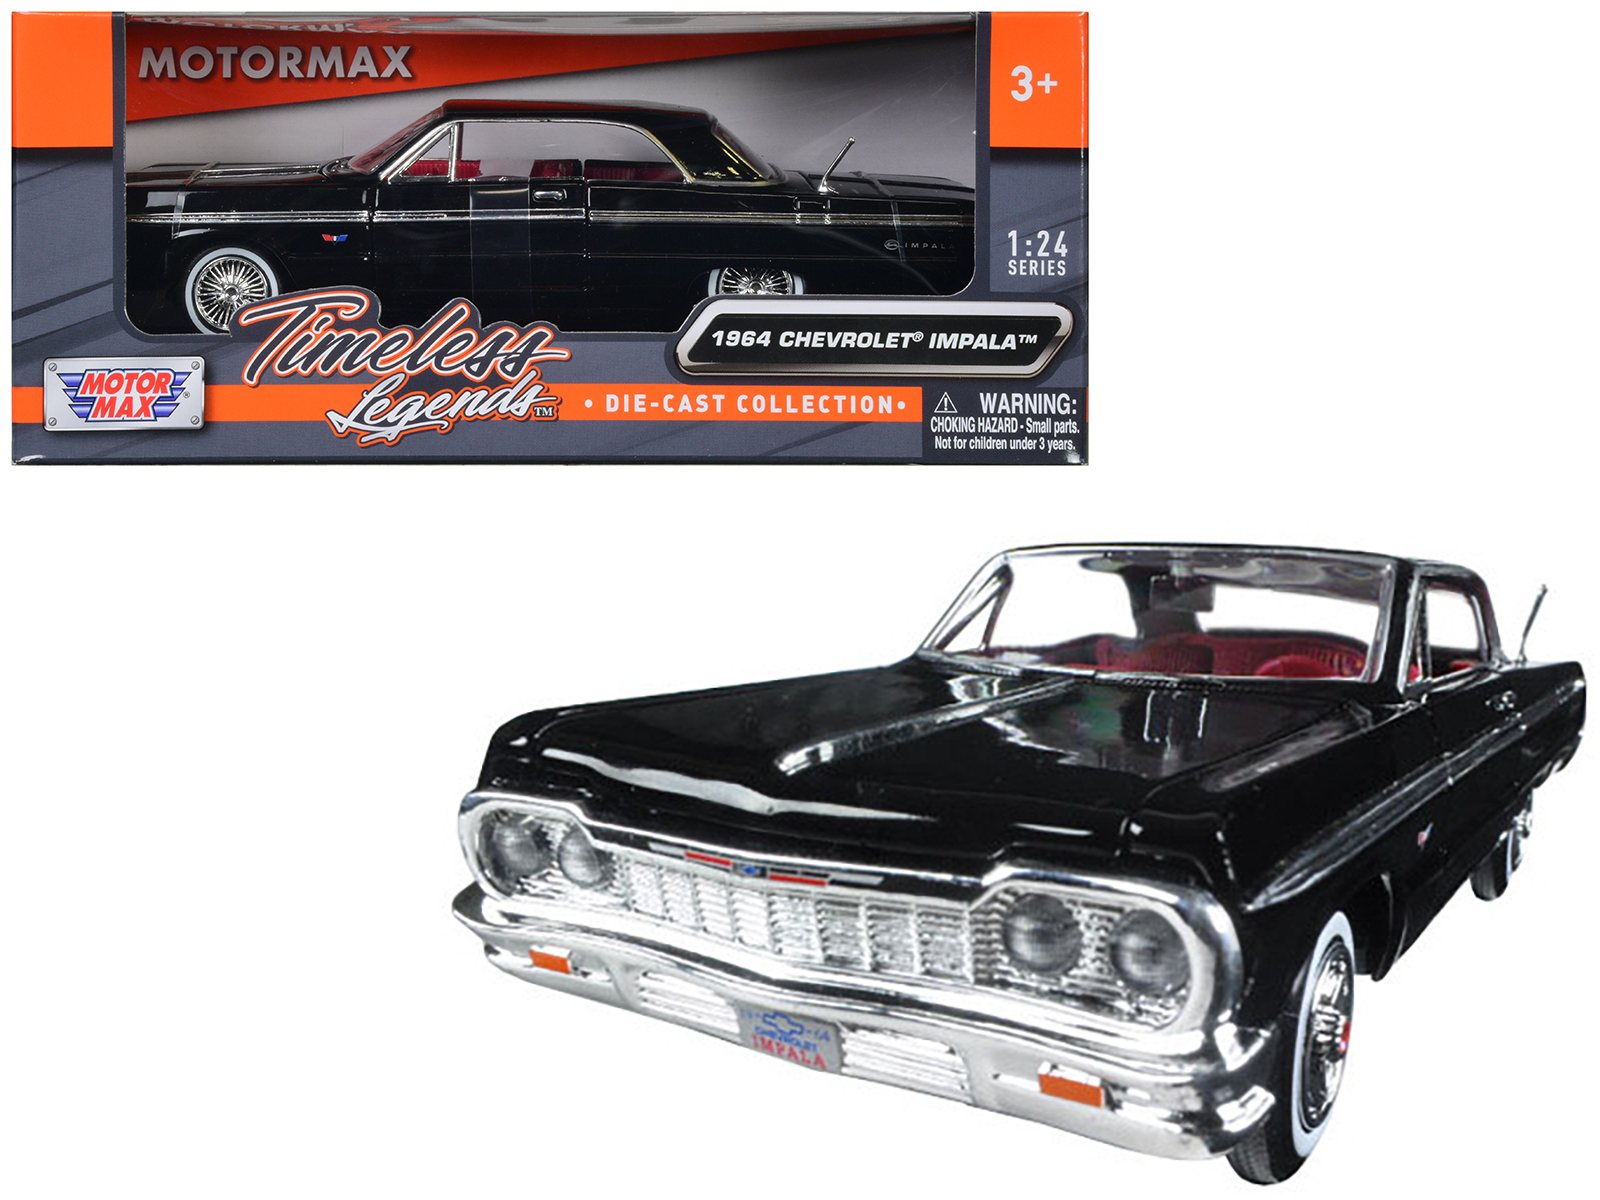 Primary image for 1964 Chevrolet Impala Black with Red Interior 1/24 Diecast Model Car by Motormax